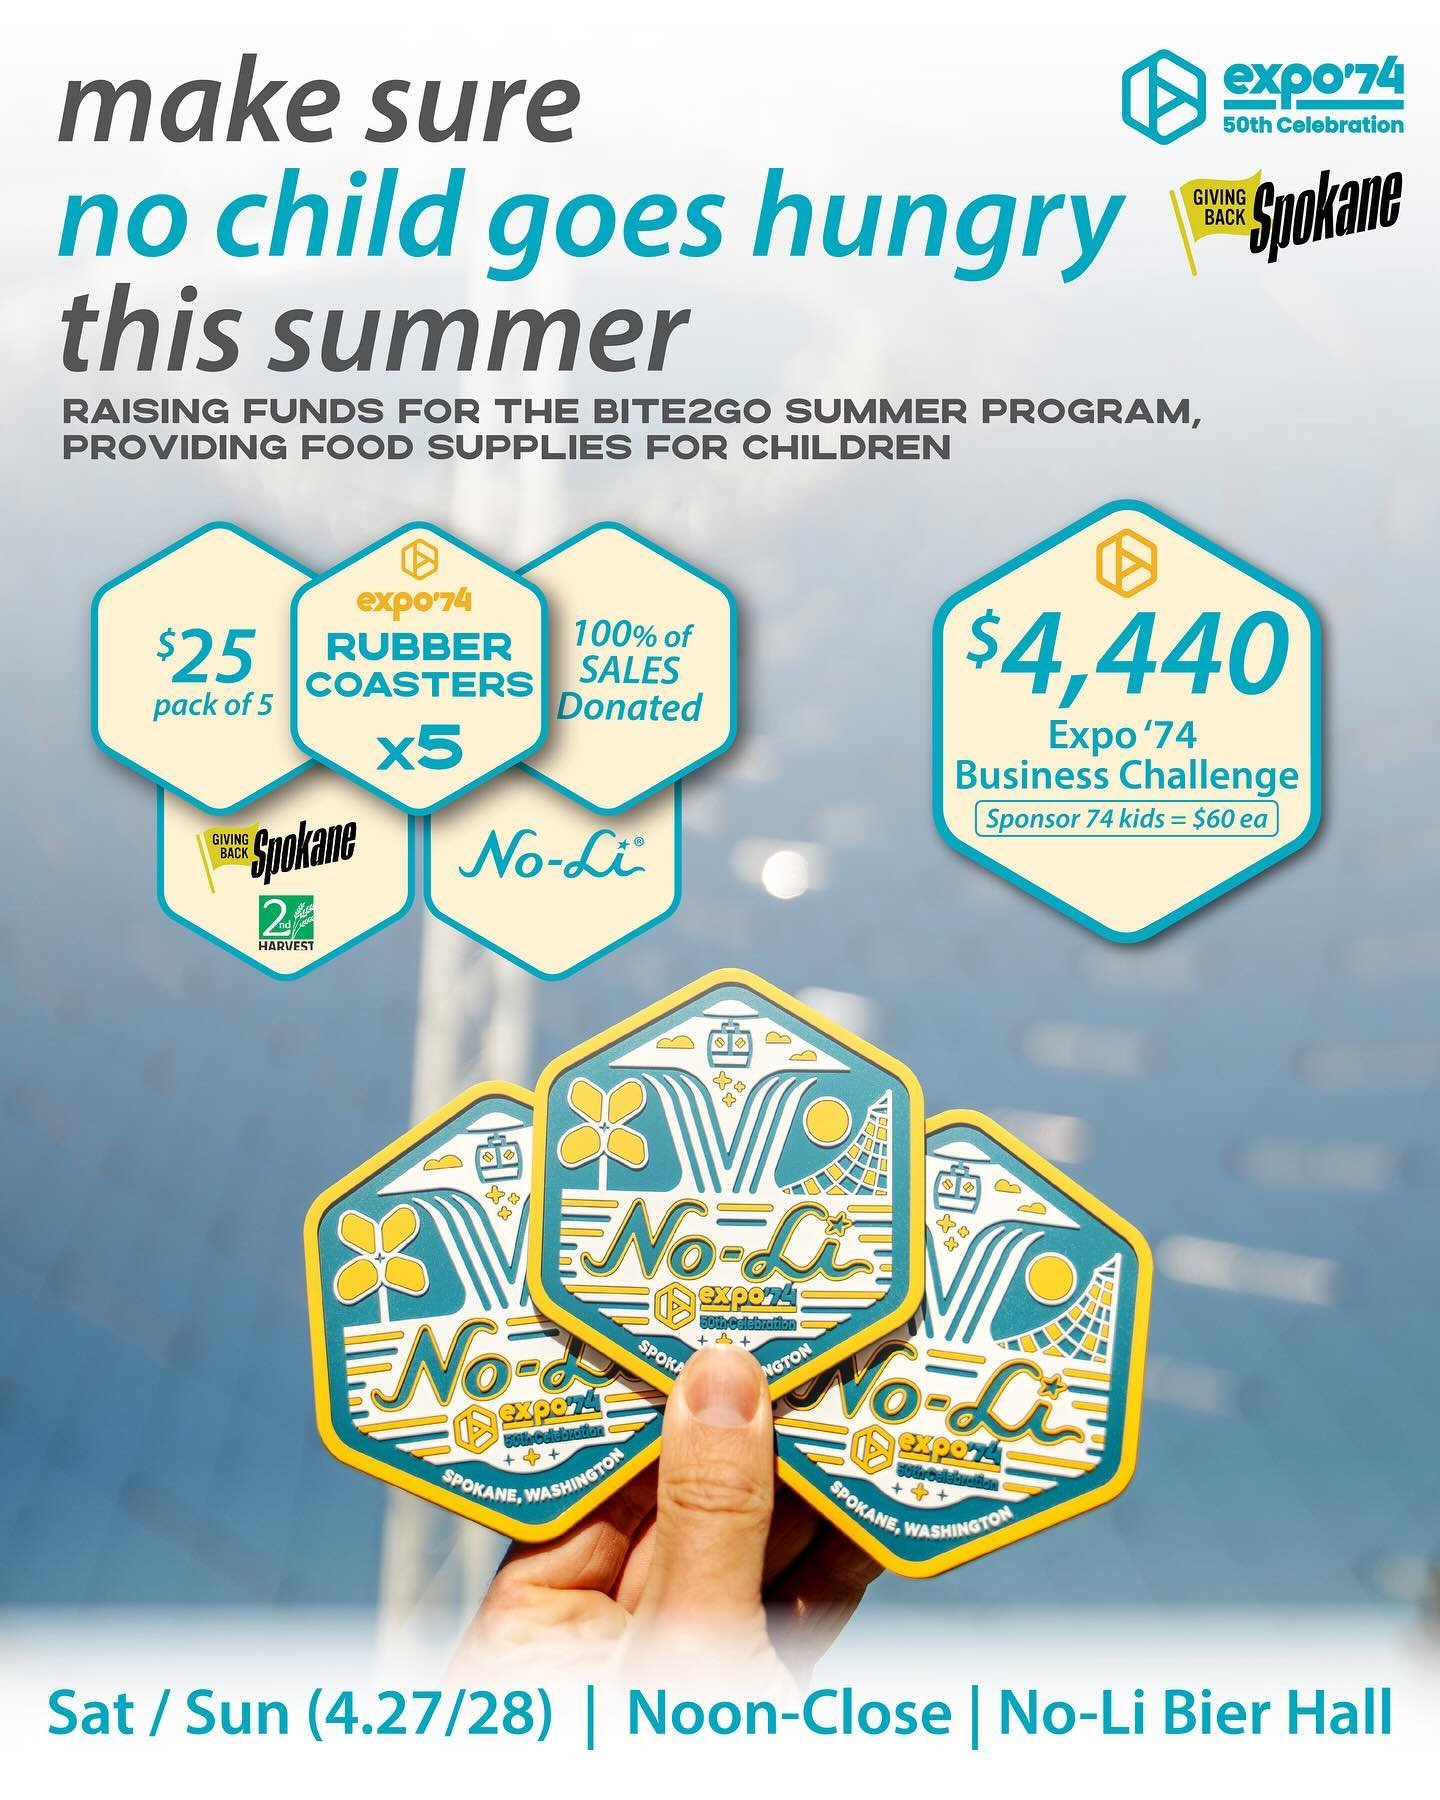 Make Sure No Child Goes Hungry This Summer🎗️

$90,000 community fundraiser to benefit 1,500 local&nbsp;children in food insecurity this summer. This Saturday &amp; Sunday from noon-5pm at the Bier Hall!

No-Li has teamed up with Giving Back Spokane&